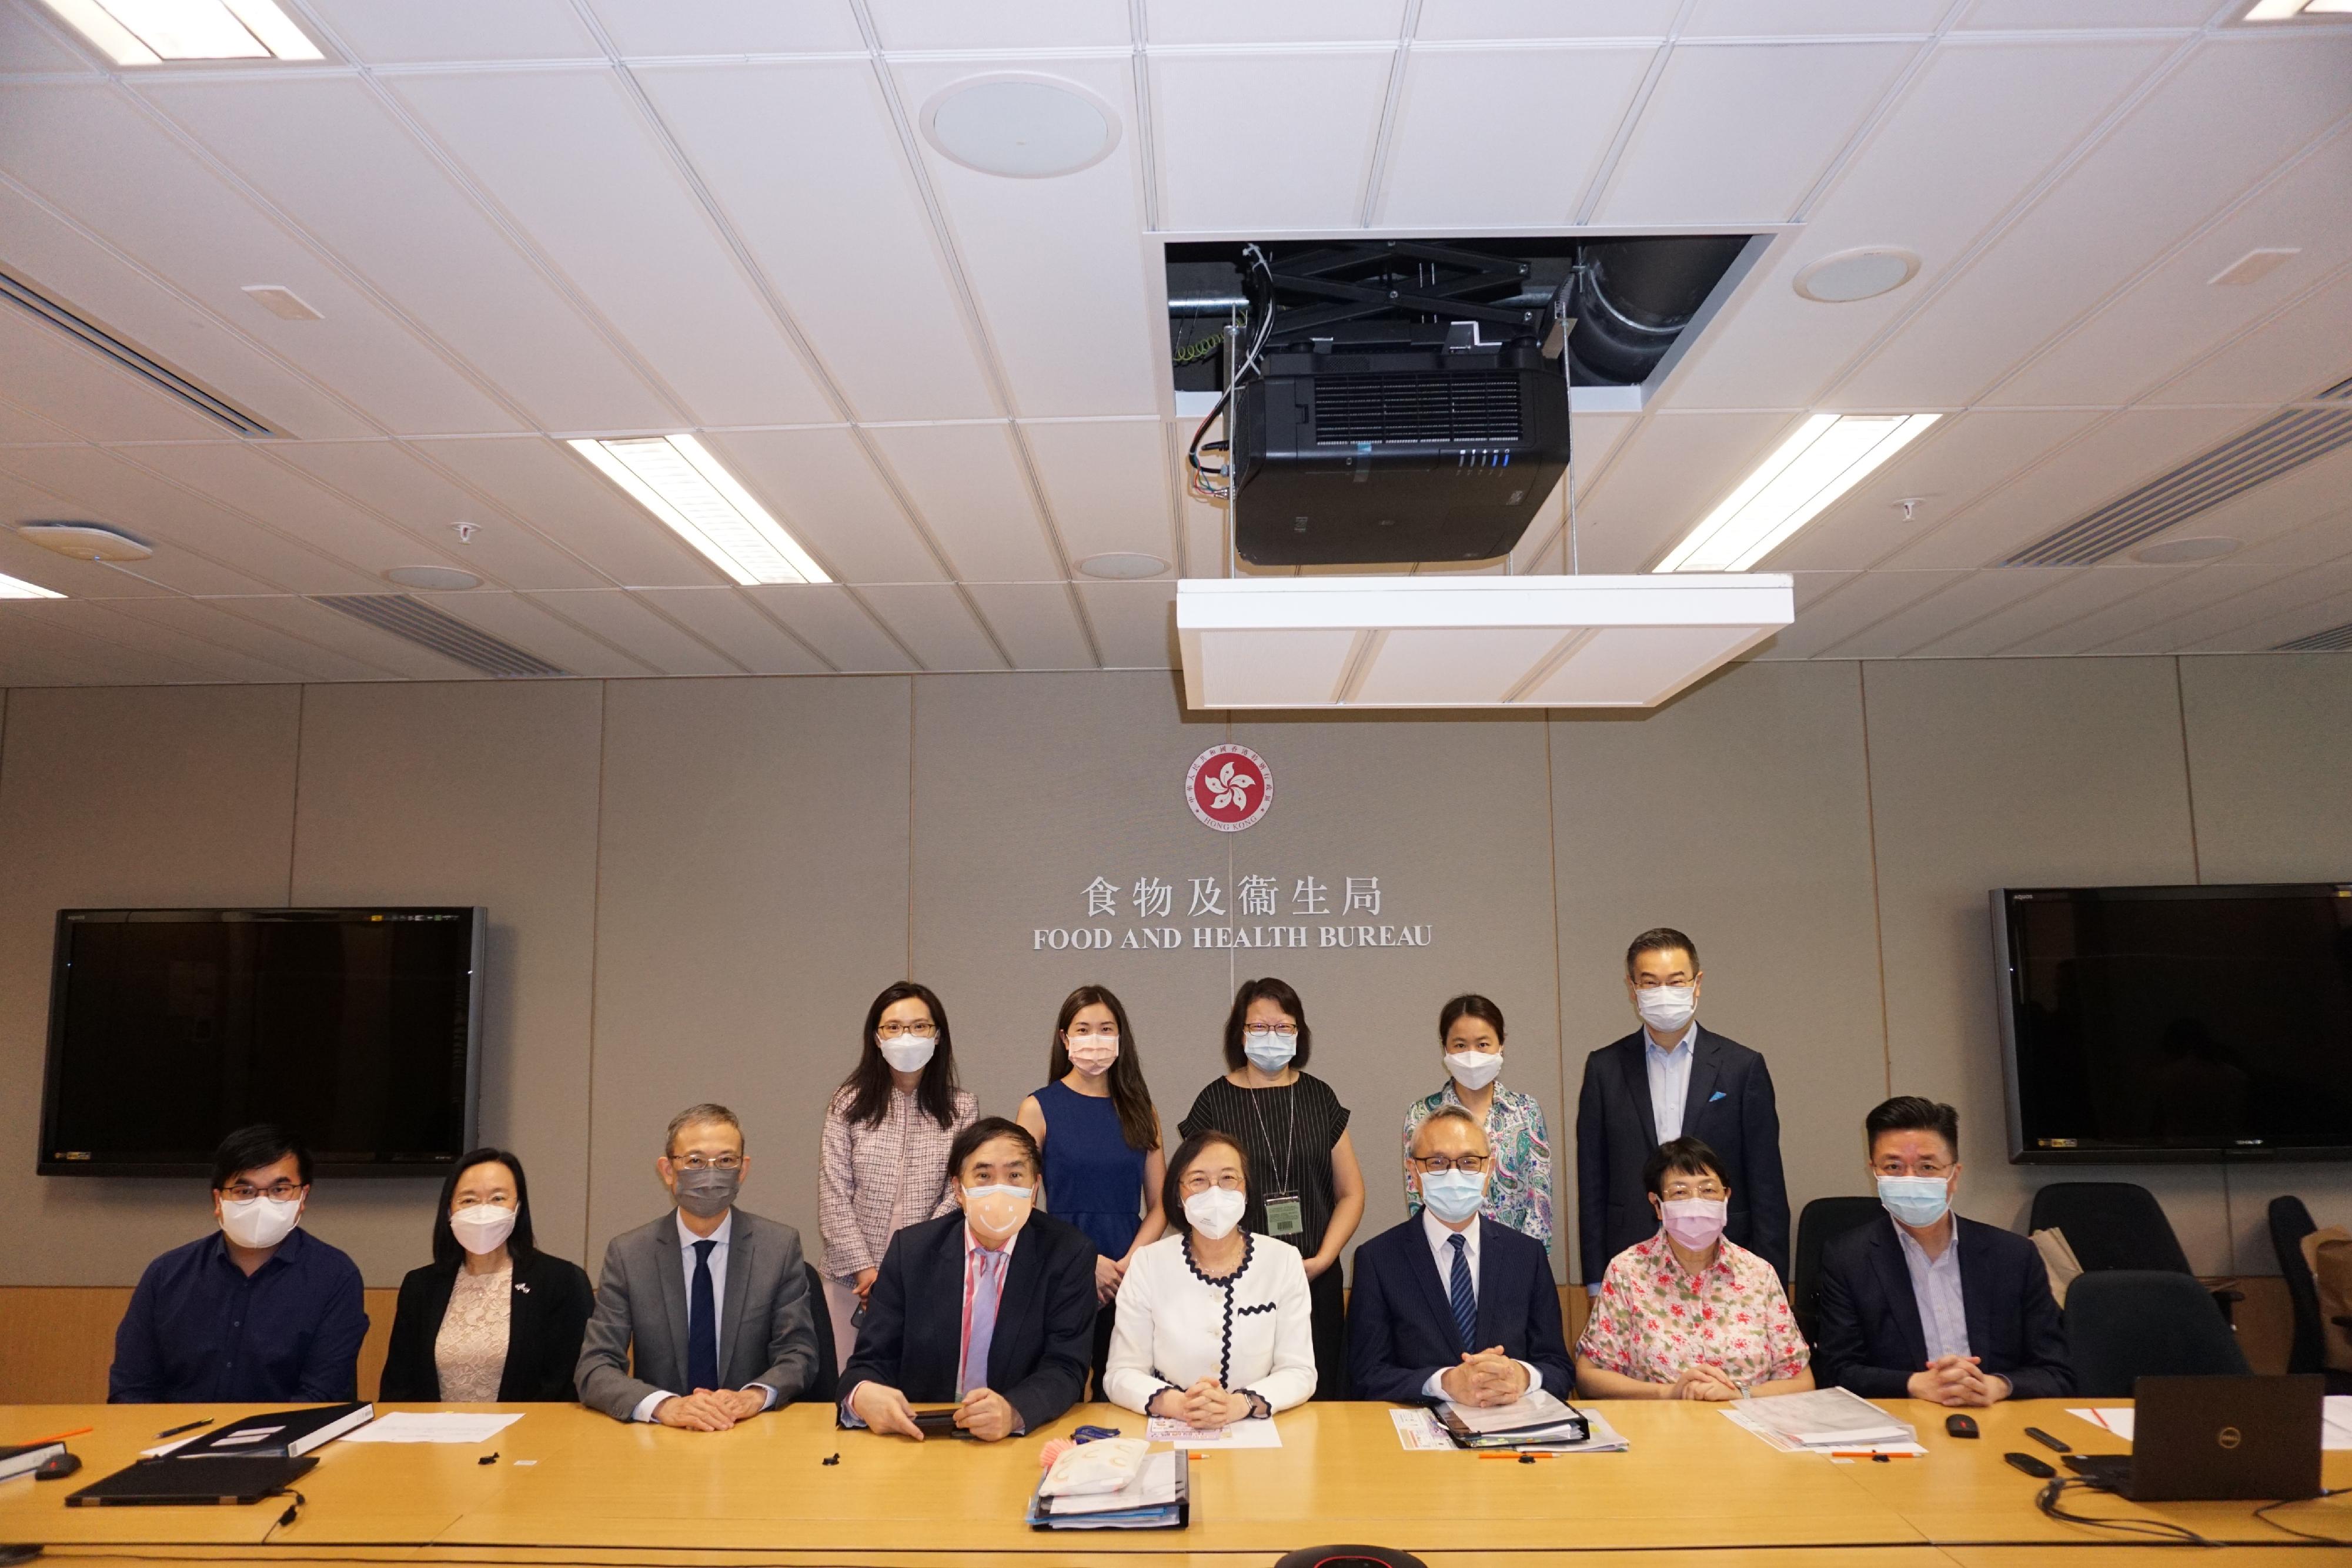 The Food and Health Bureau convened the eighth meeting of the Committee on Promotion of Breastfeeding today (June 1). Photo shows the Secretary for Food and Health, Professor Sophia Chan (front row, fourth right); and the Under Secretary for Food and Health, Dr Chui Tak-yi (front row, third right); in a group photo with other committee members before the meeting started.

